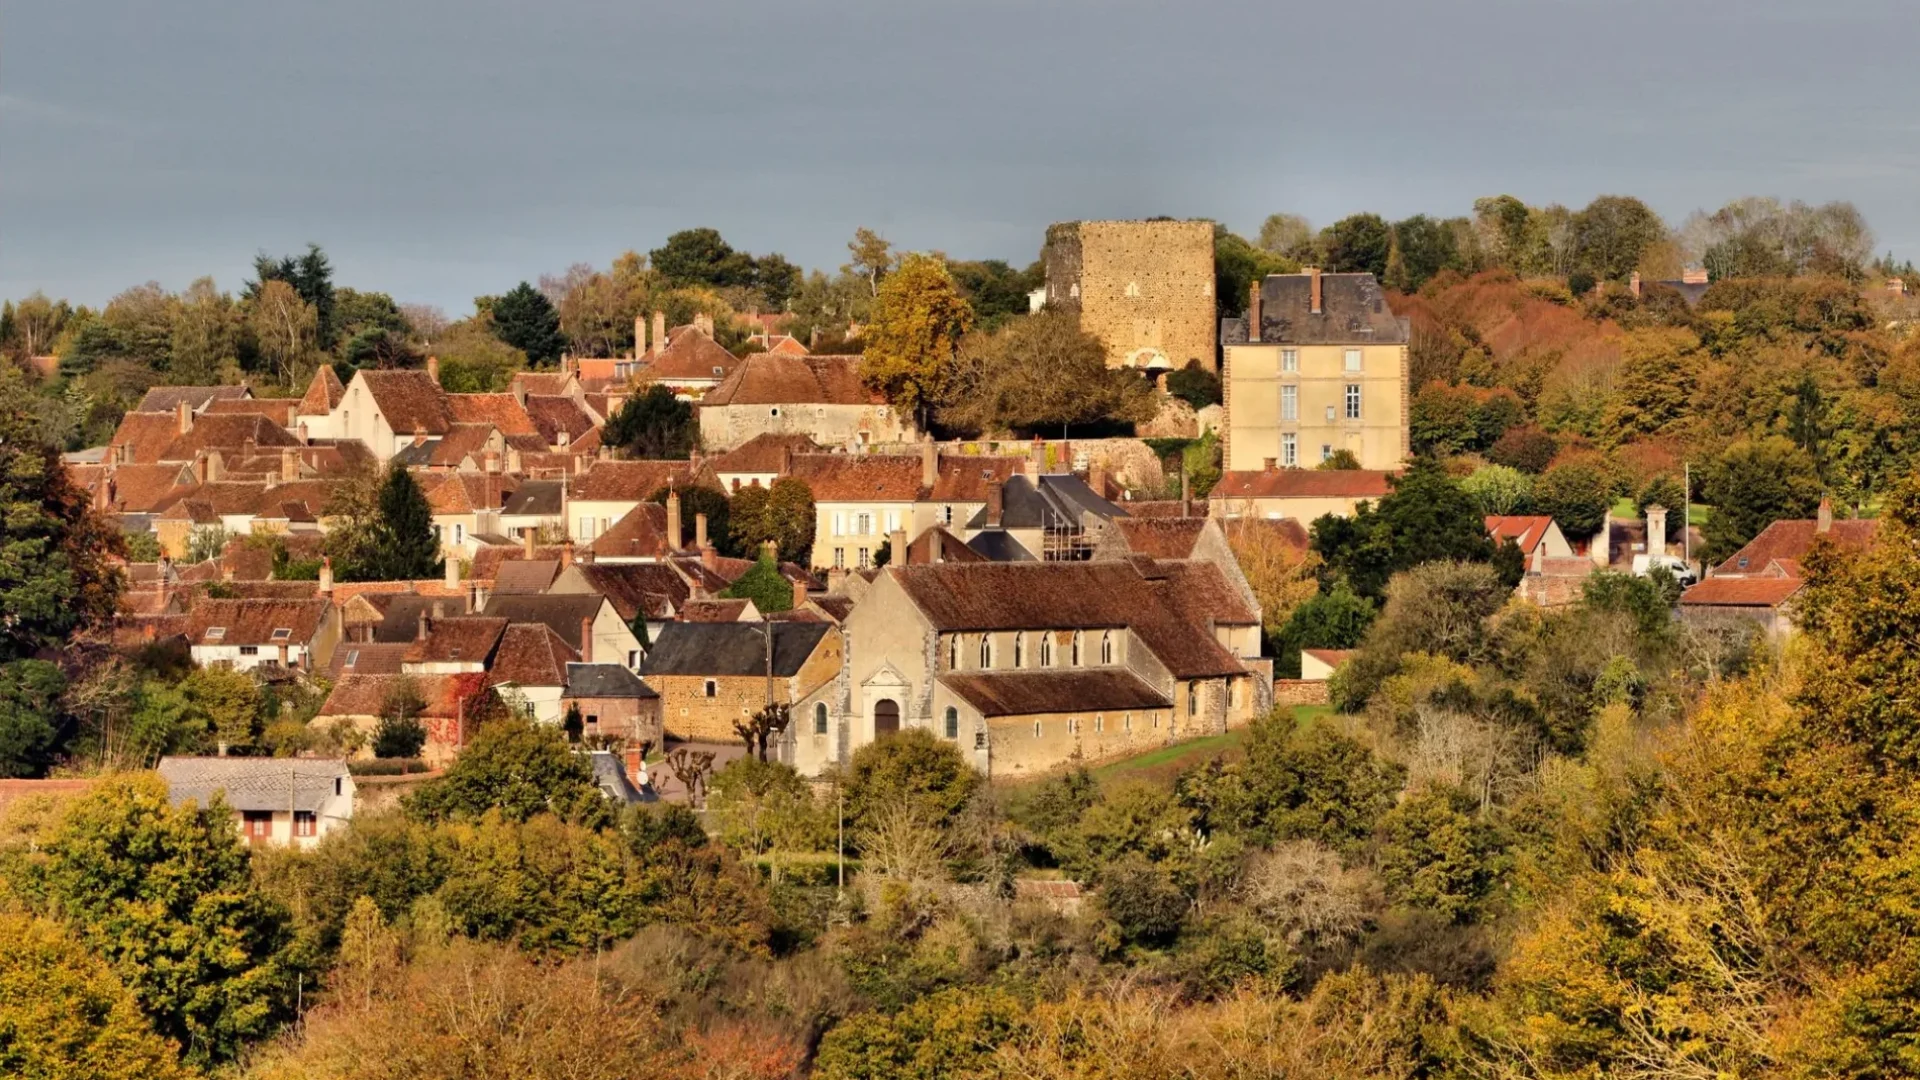 The village of Saint-Sauveur in Puisaye